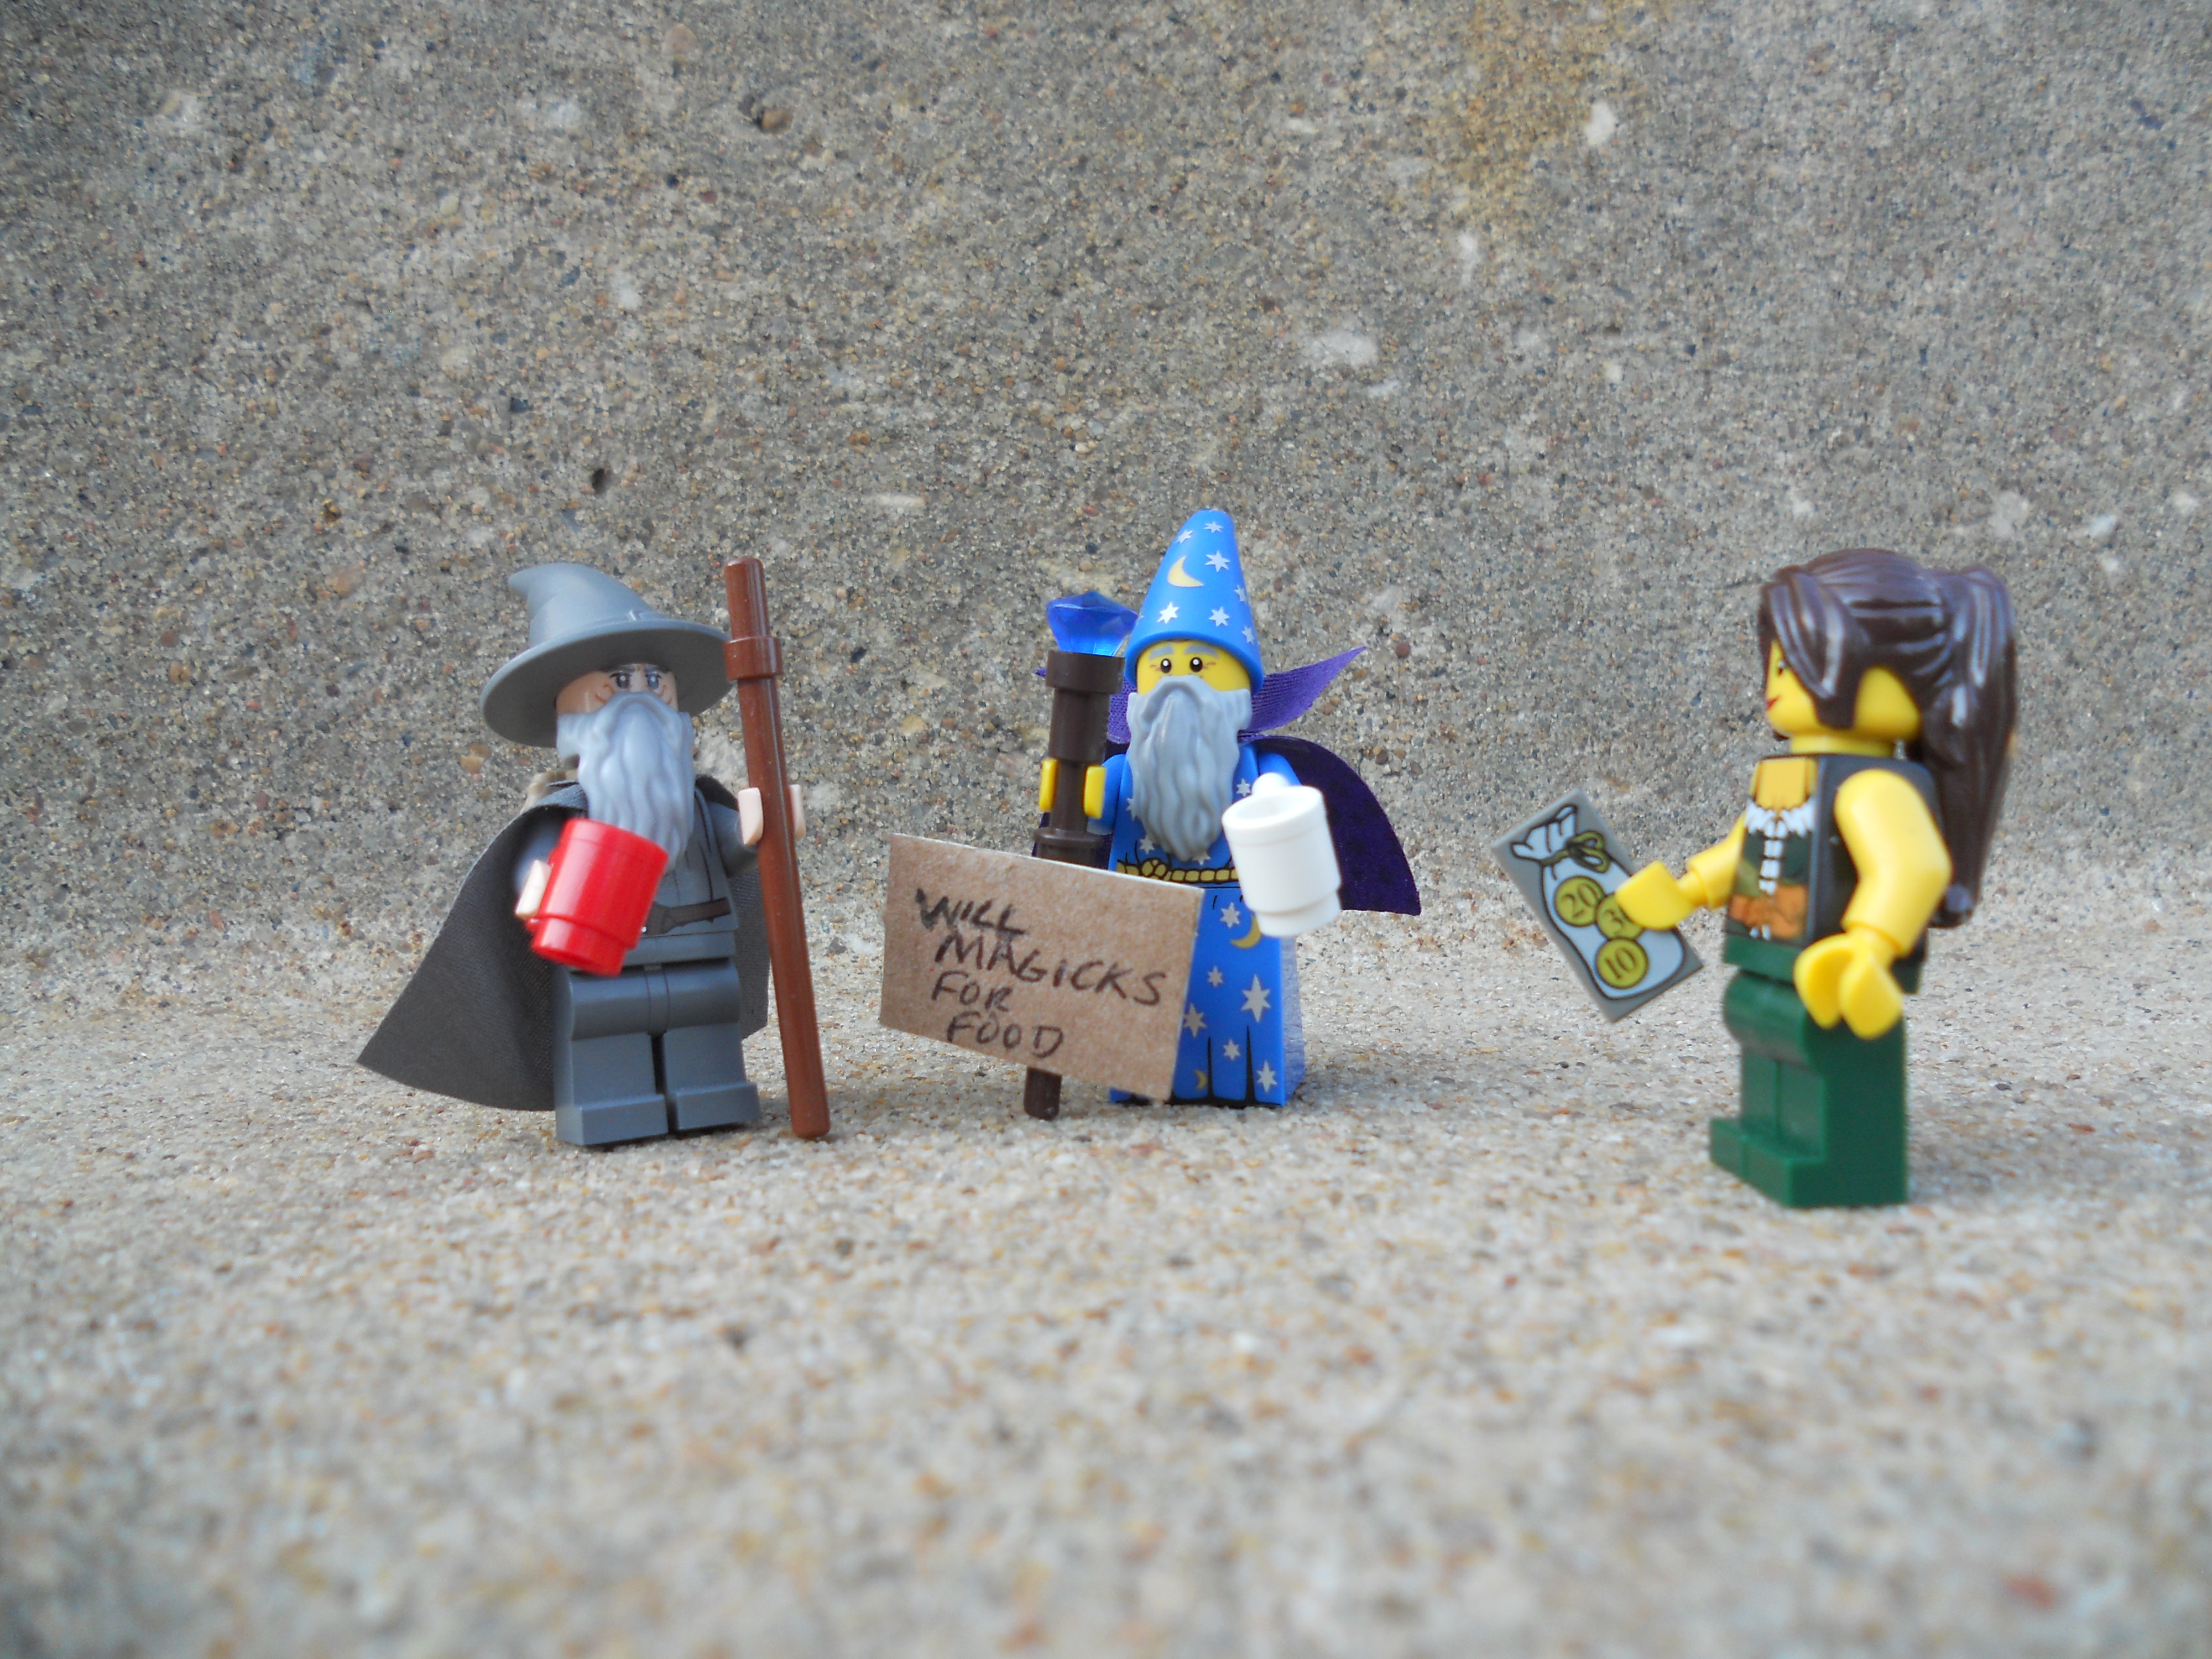 Minifig Wizards Panhandling on the street.